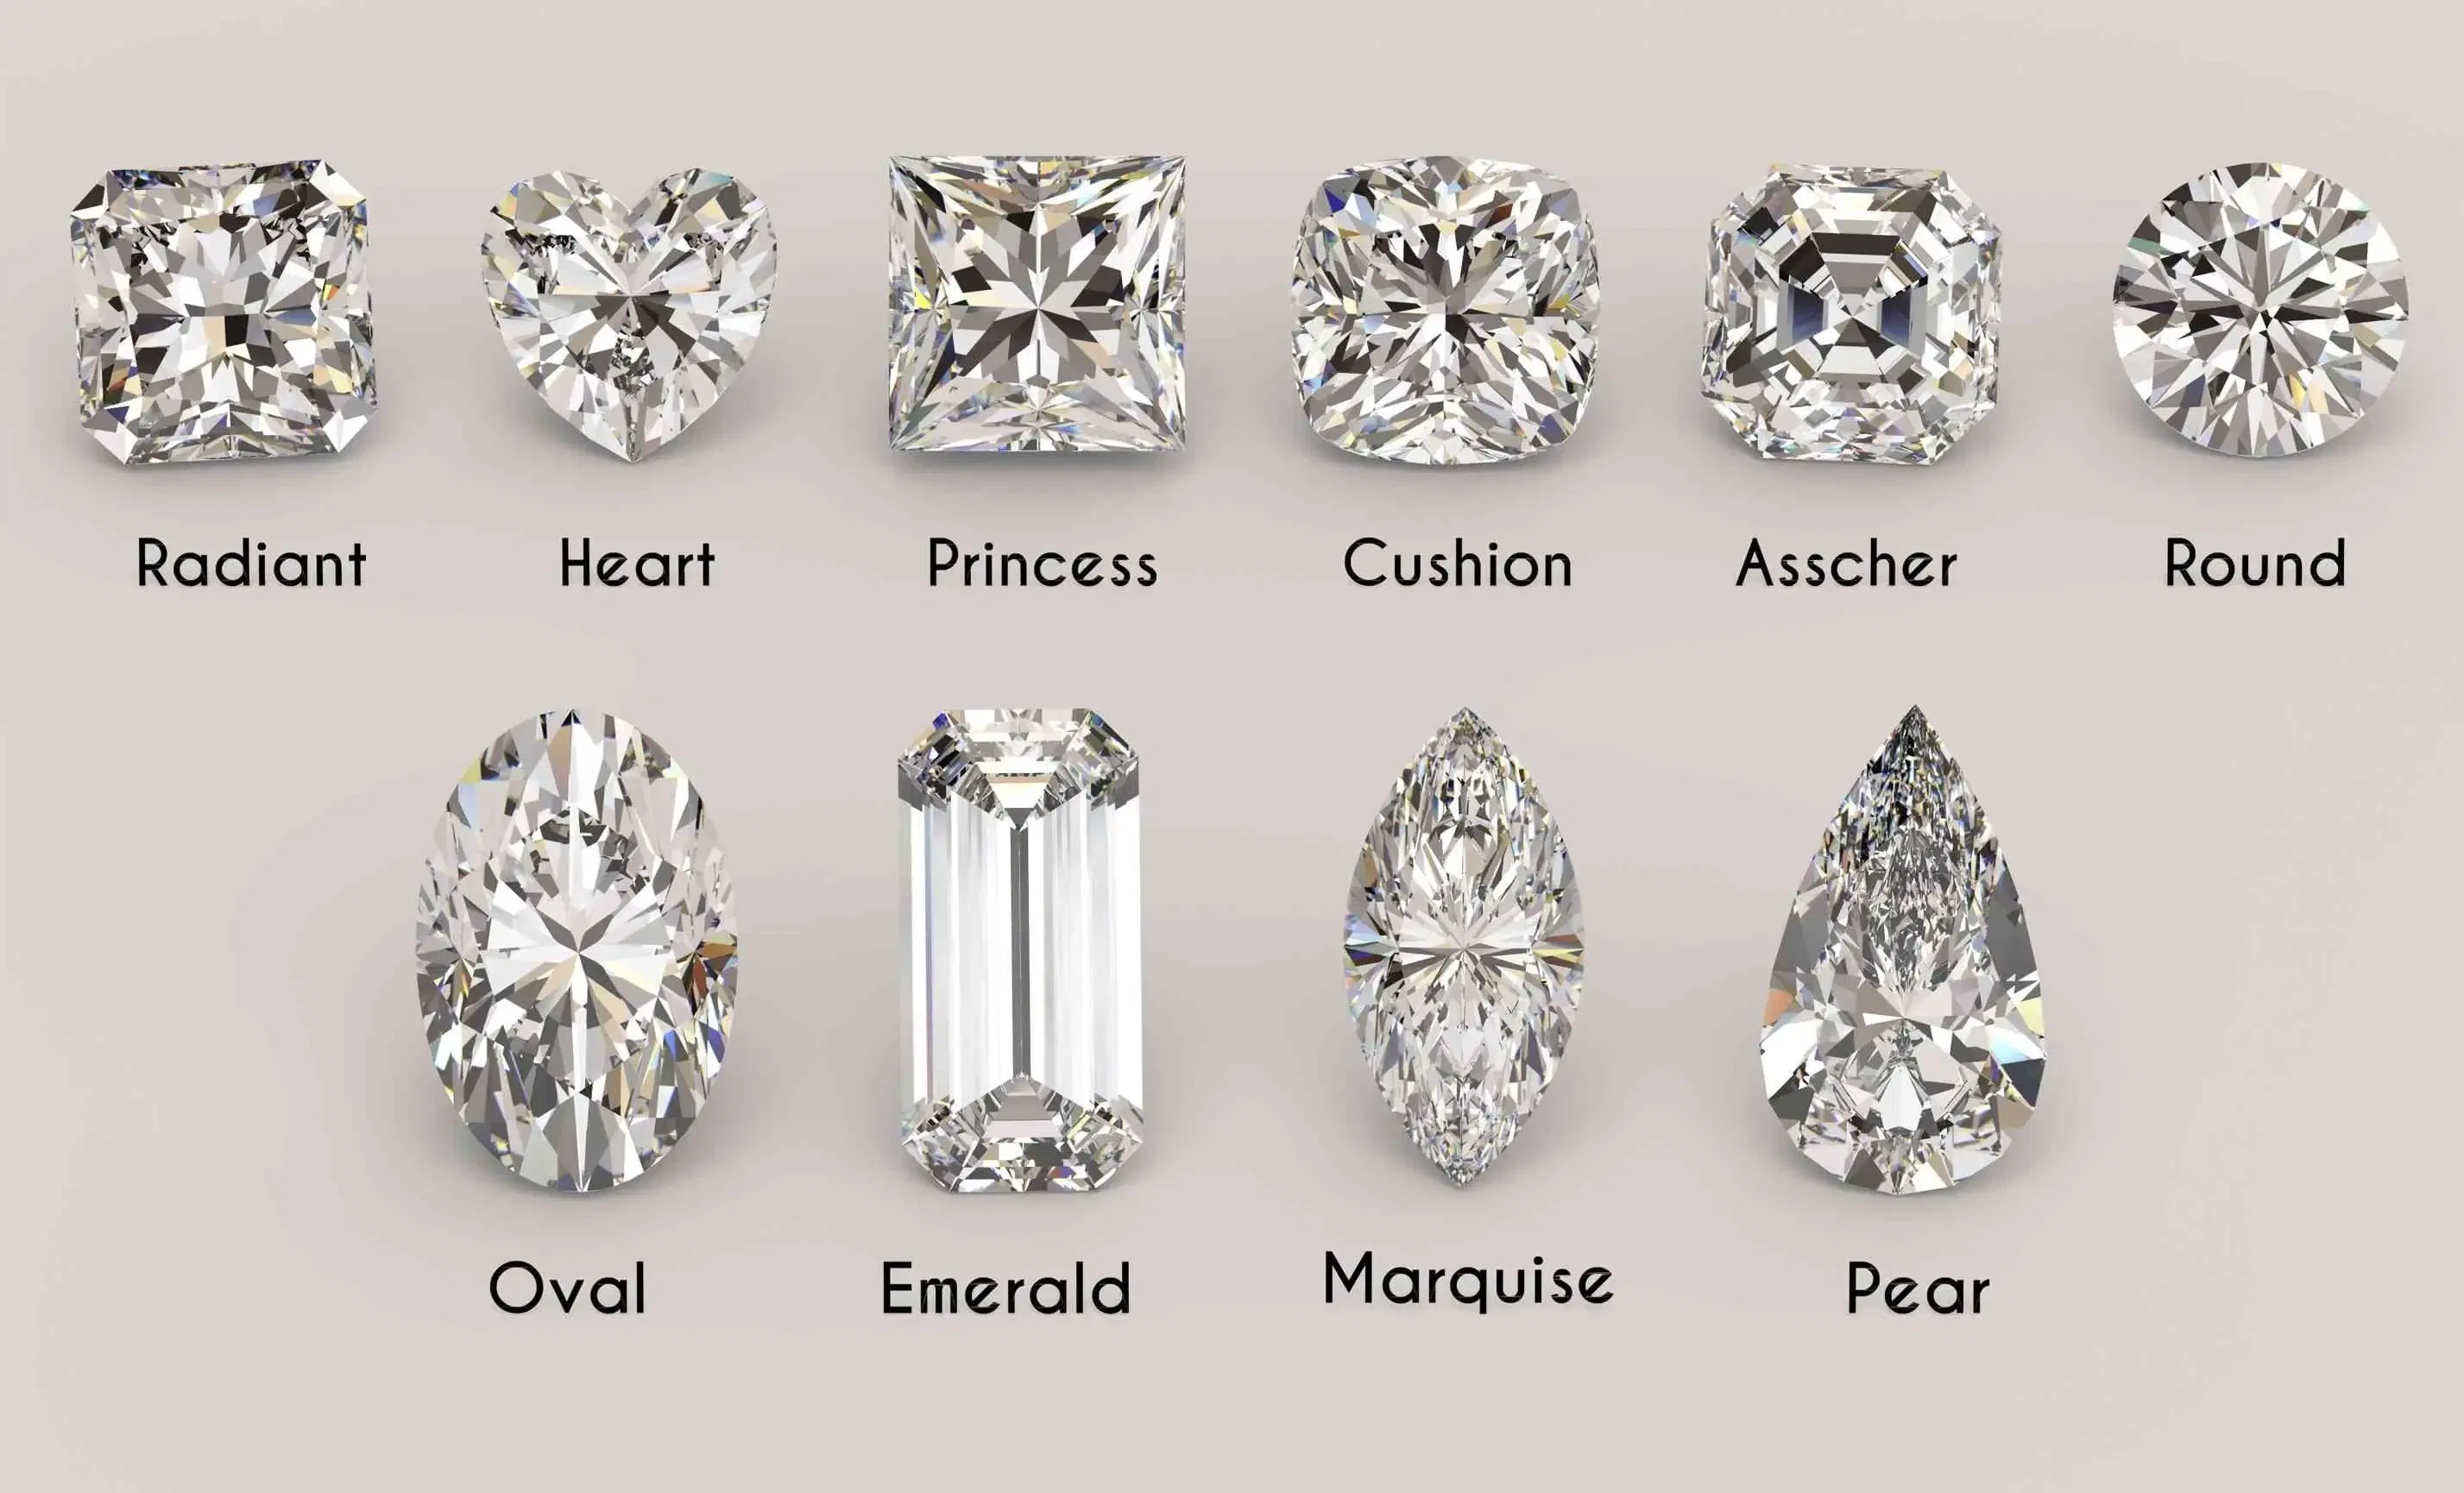 9 Most Popular Diamond Shapes for Engagement Rings